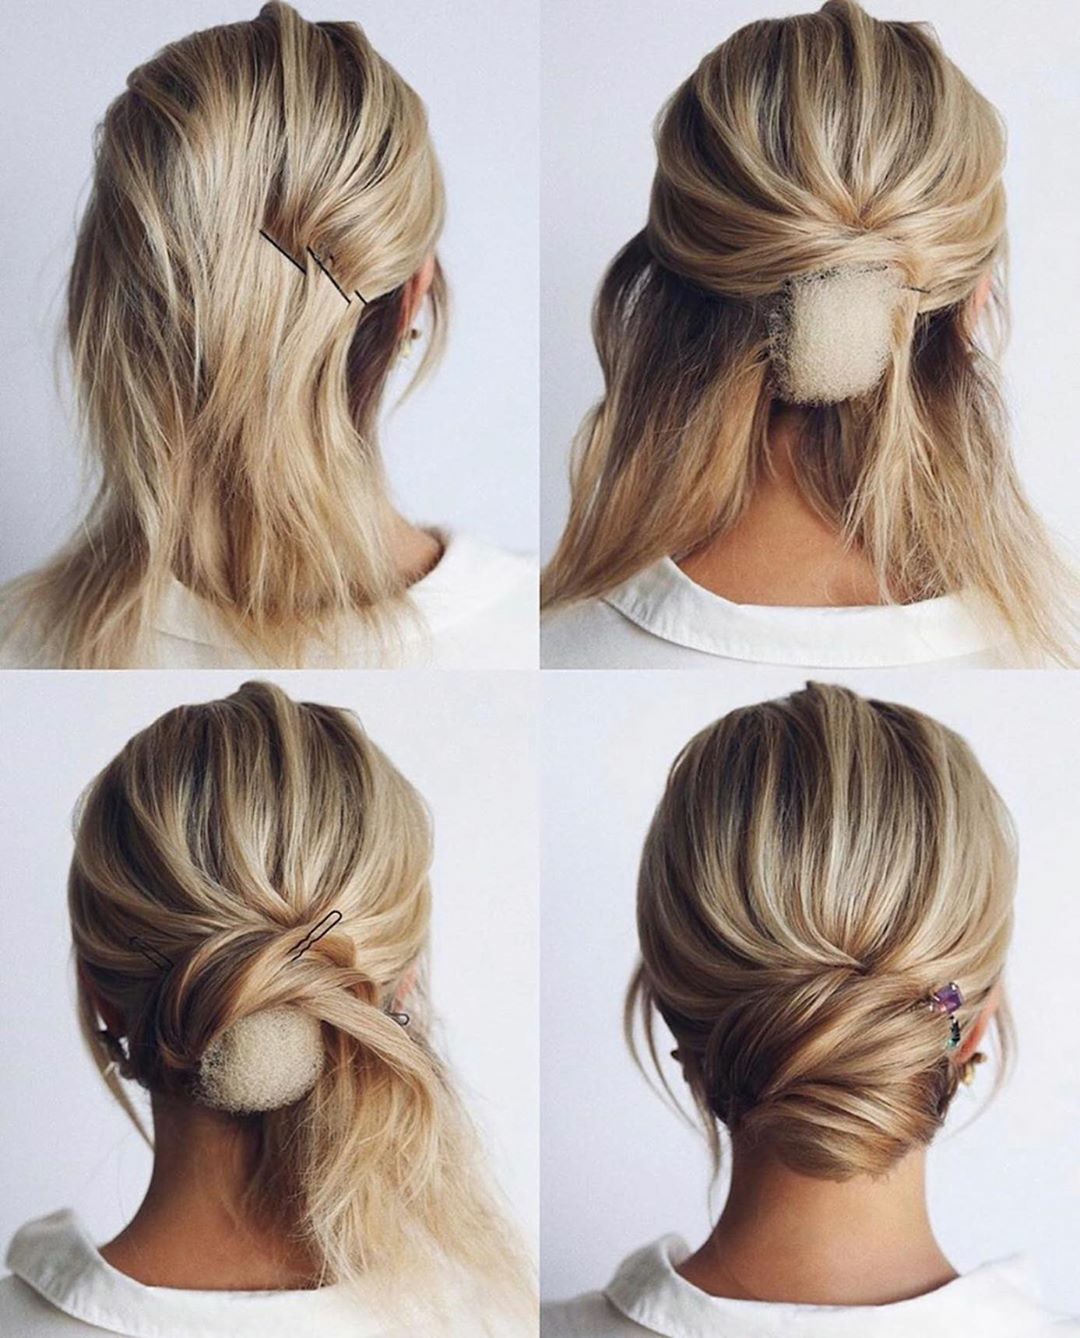 How to Do a Messy Bun With Thin Hair